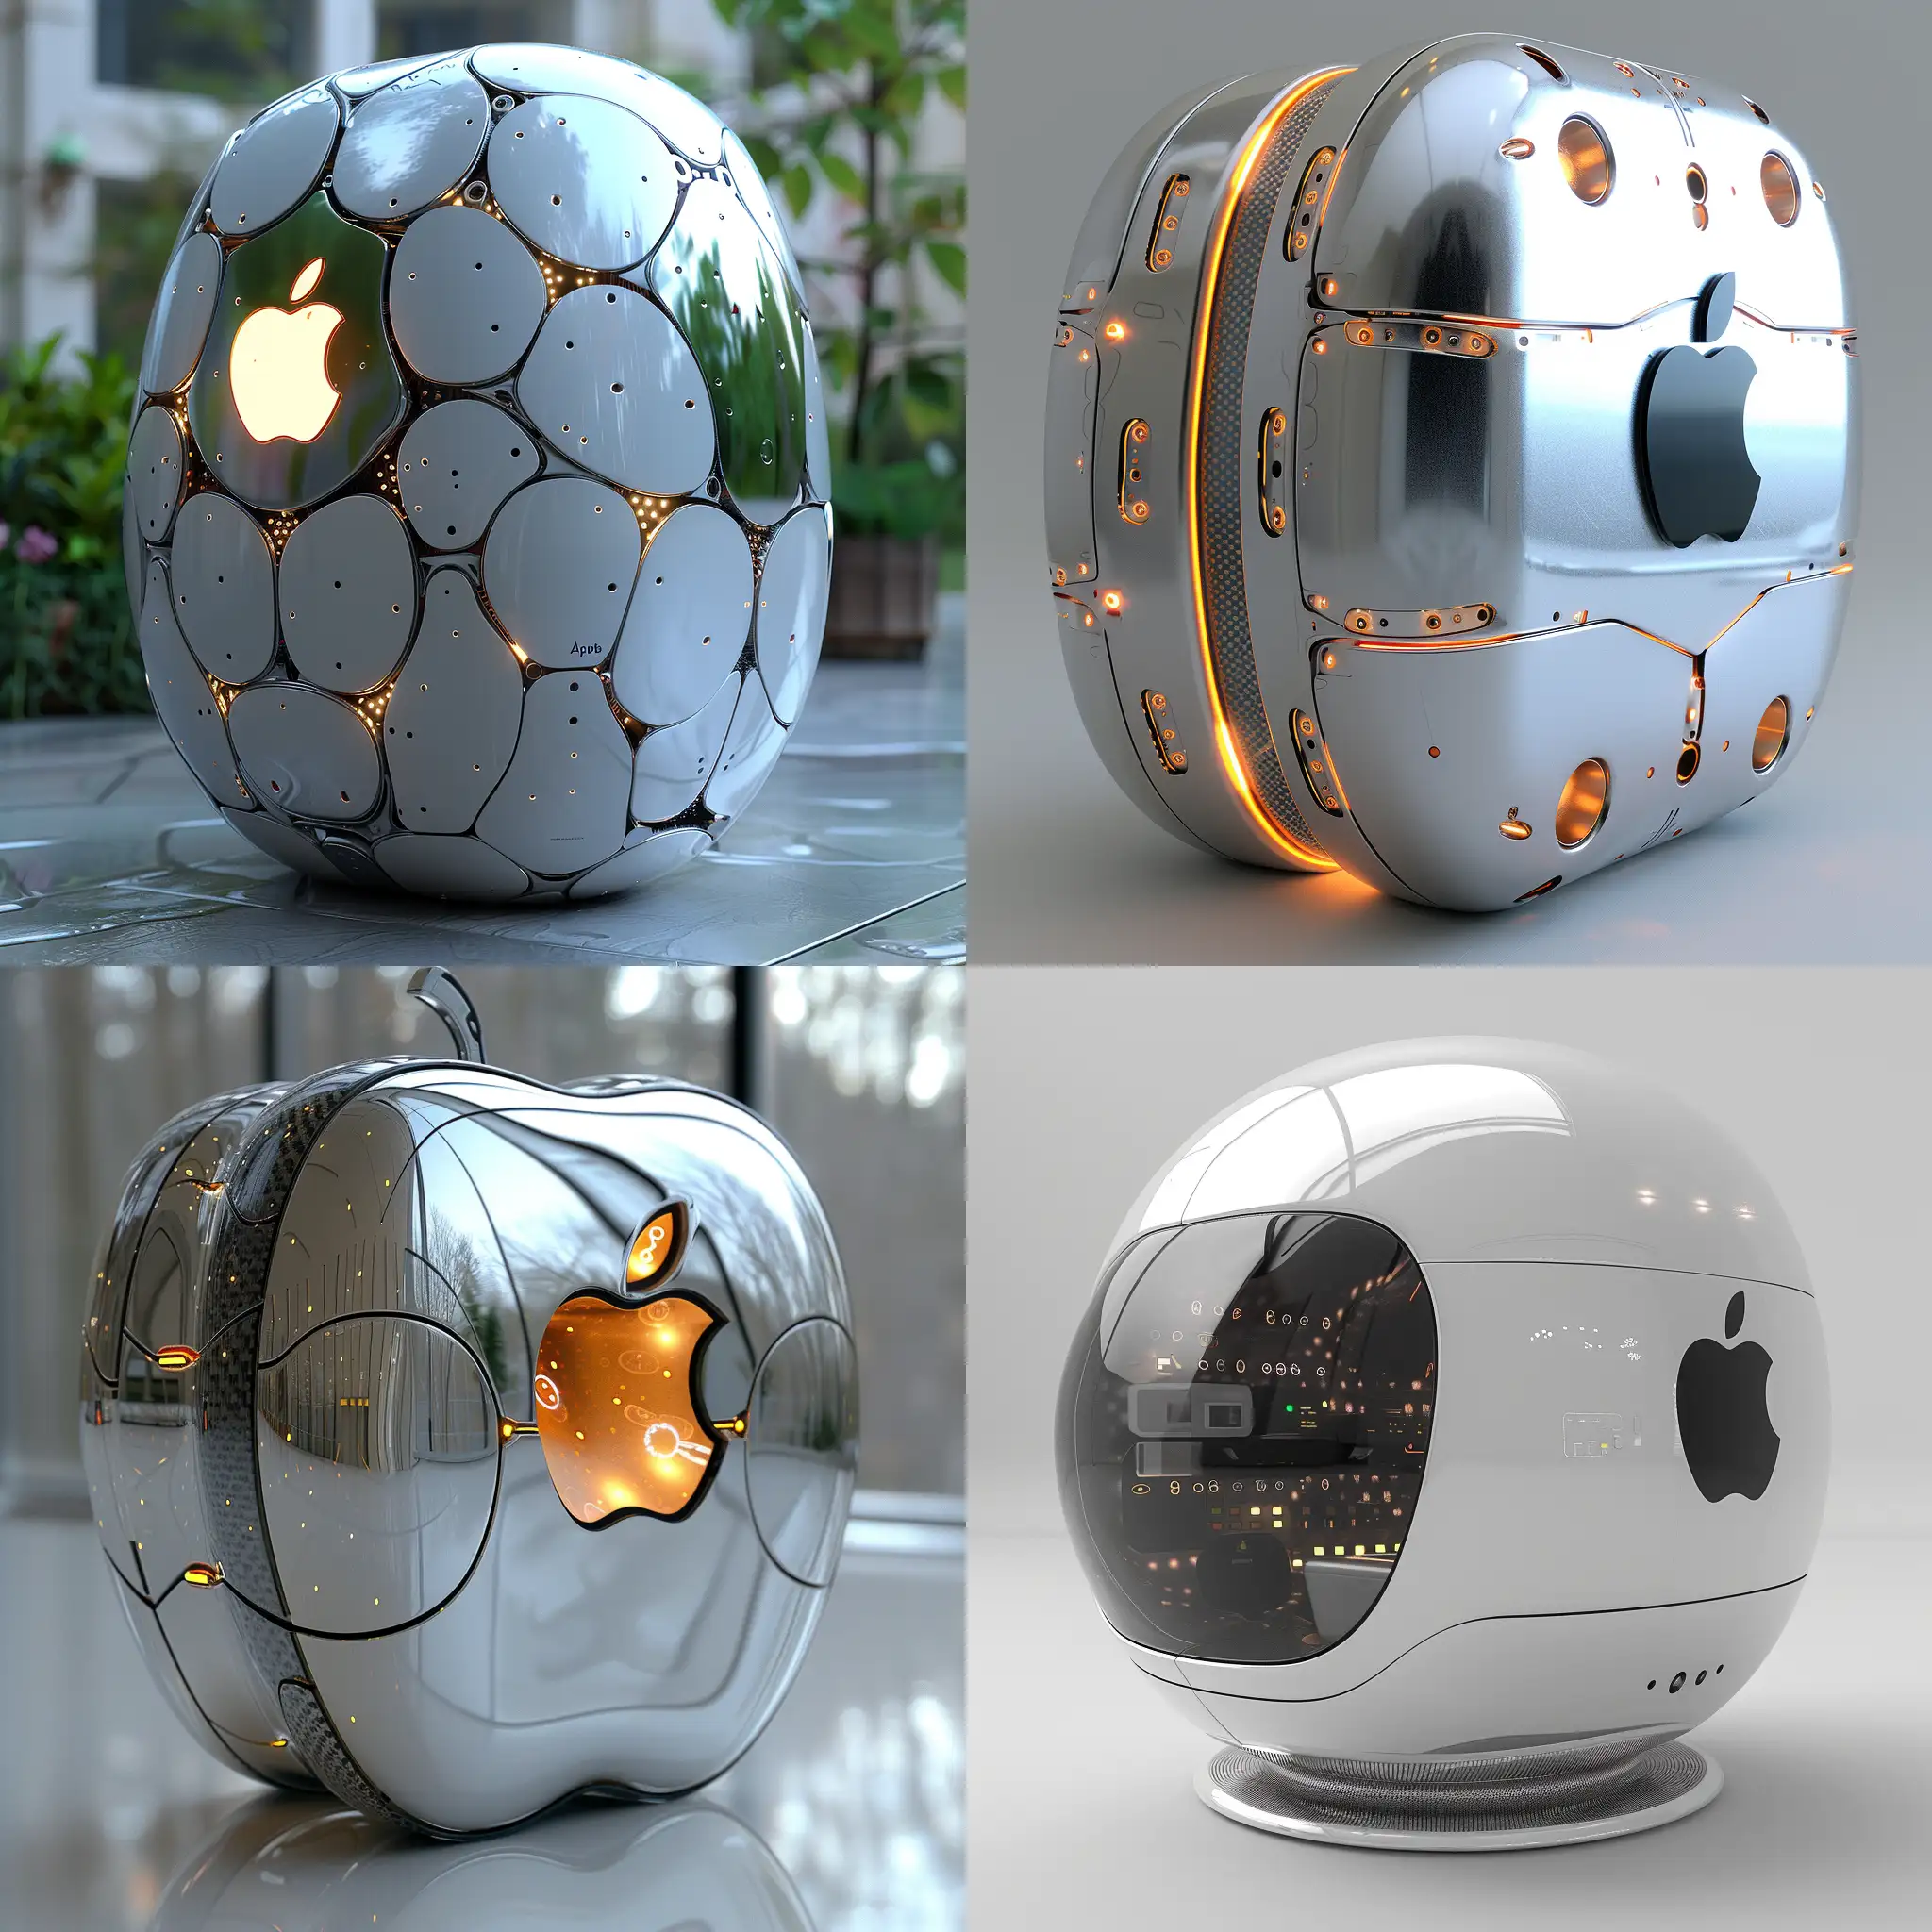 Futuristic-Aluminum-and-Carbon-Apple-Prototype-with-Integrated-System